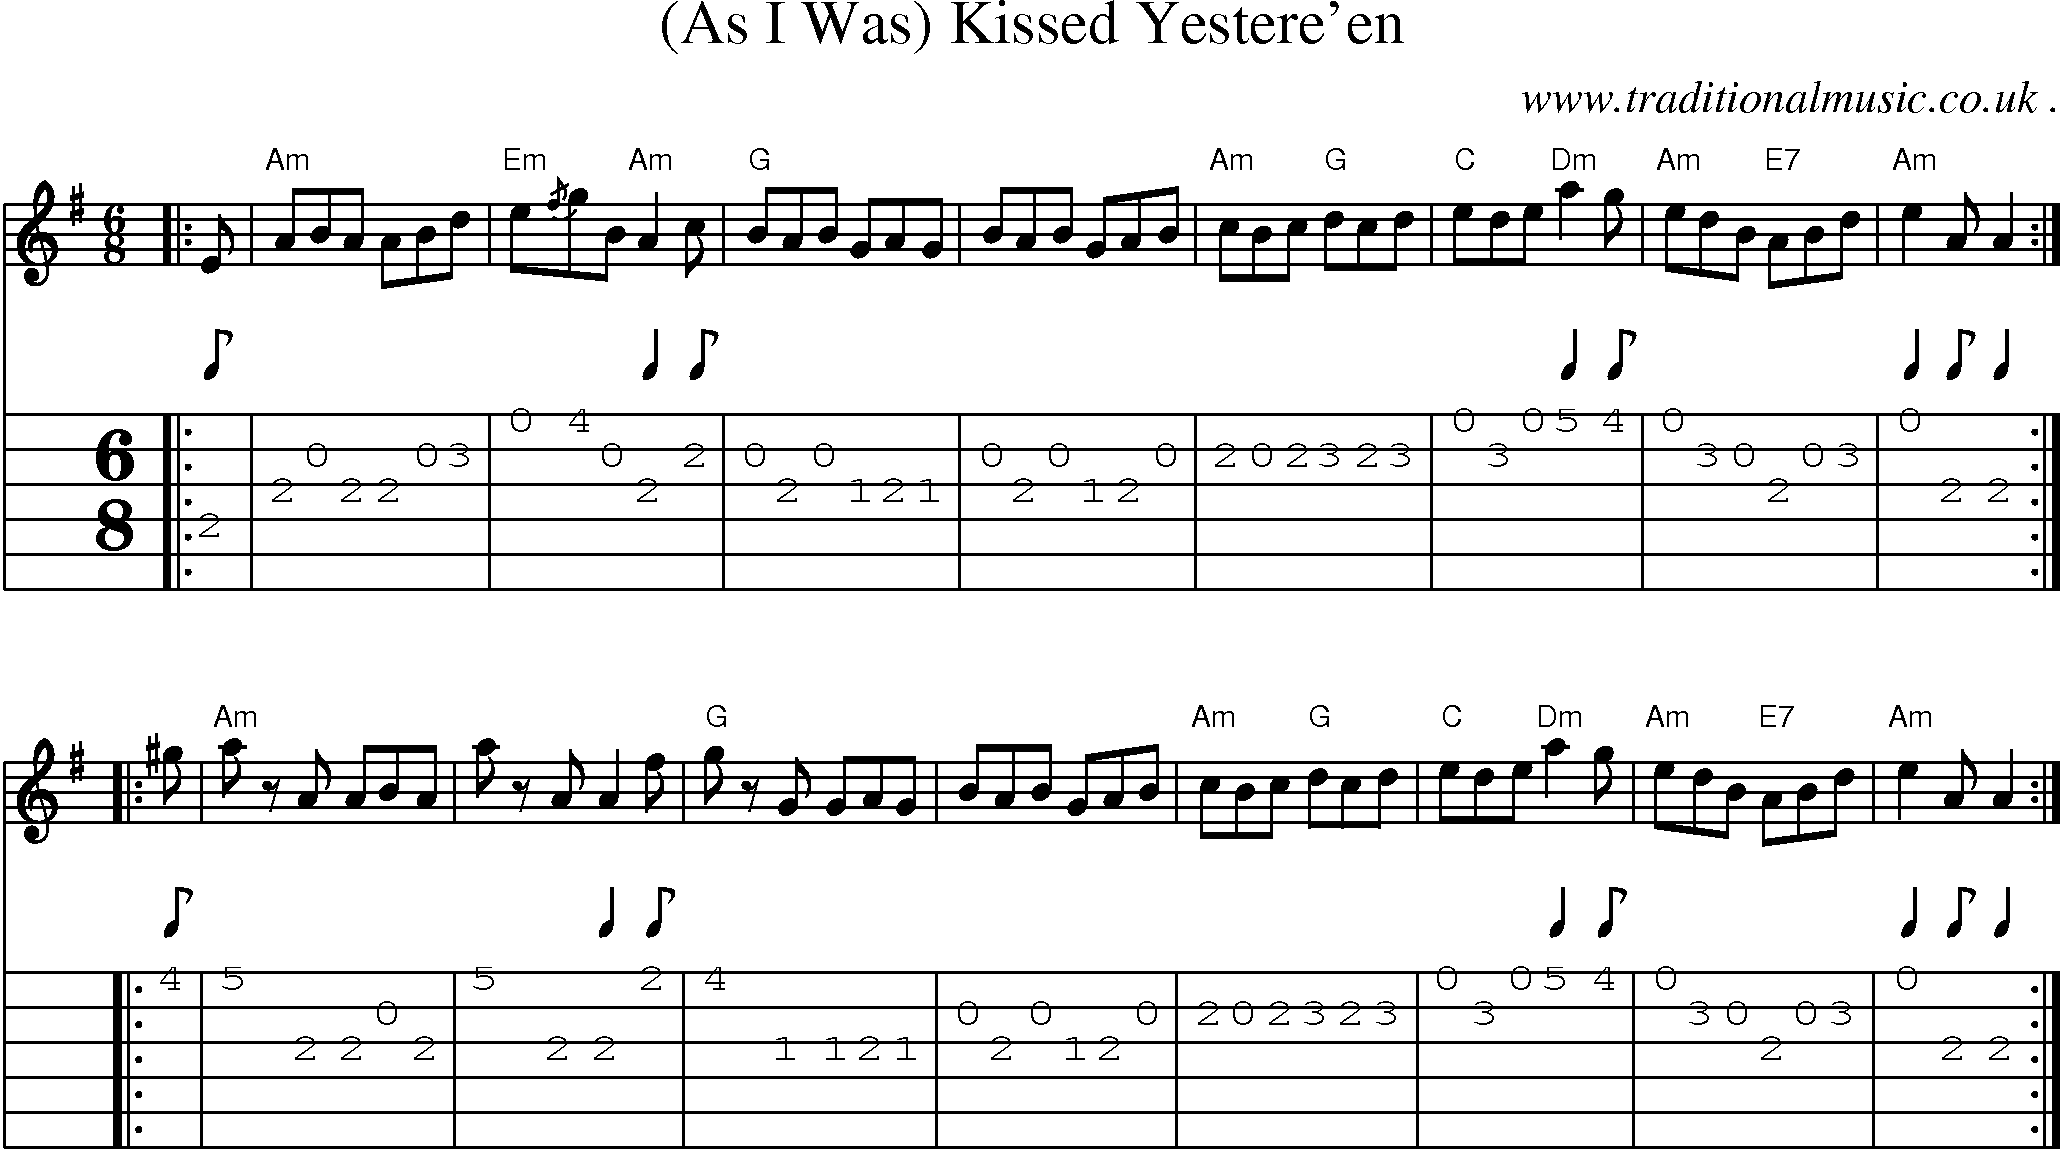 Sheet-music  score, Chords and Guitar Tabs for As I Was Kissed Yestereen